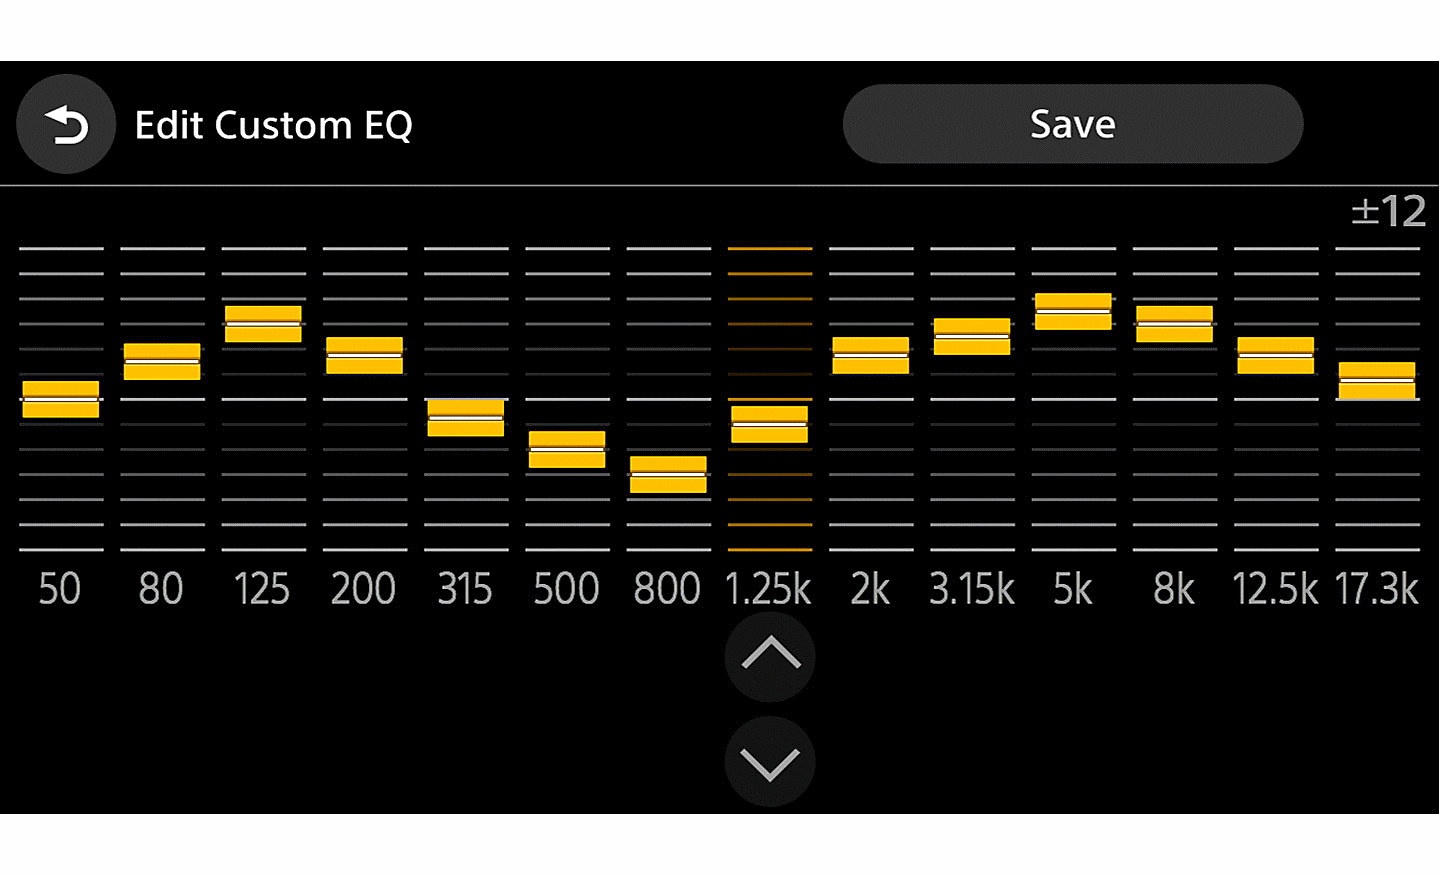 Sample user interface showing 14-band EQ feature and available options.